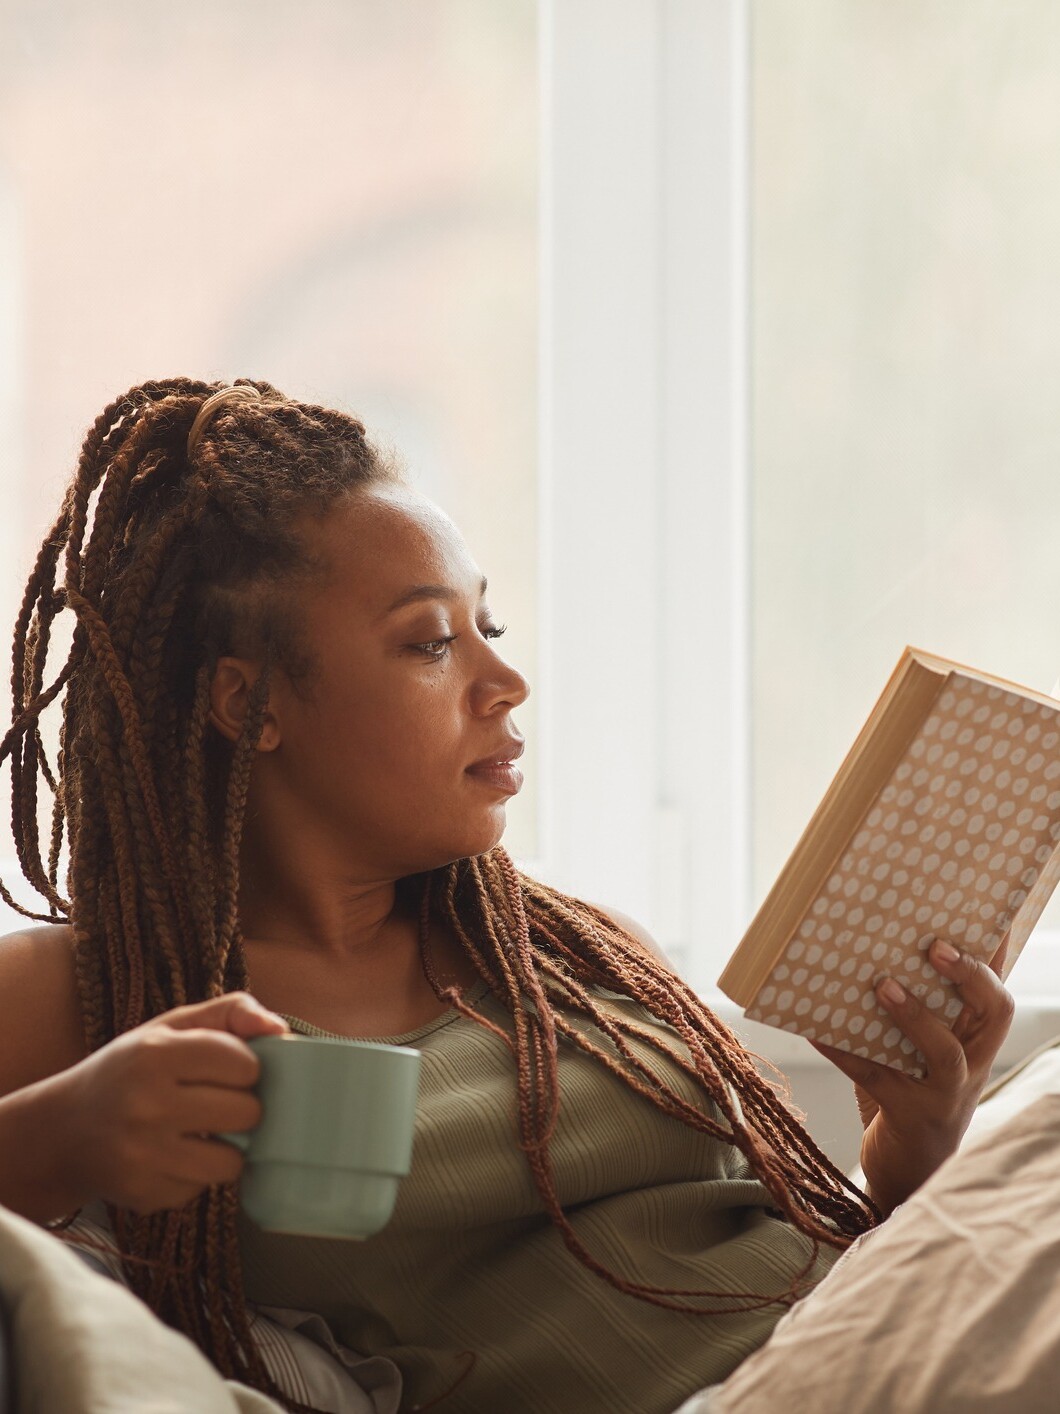 Our next book club pick is The Other Black Girl